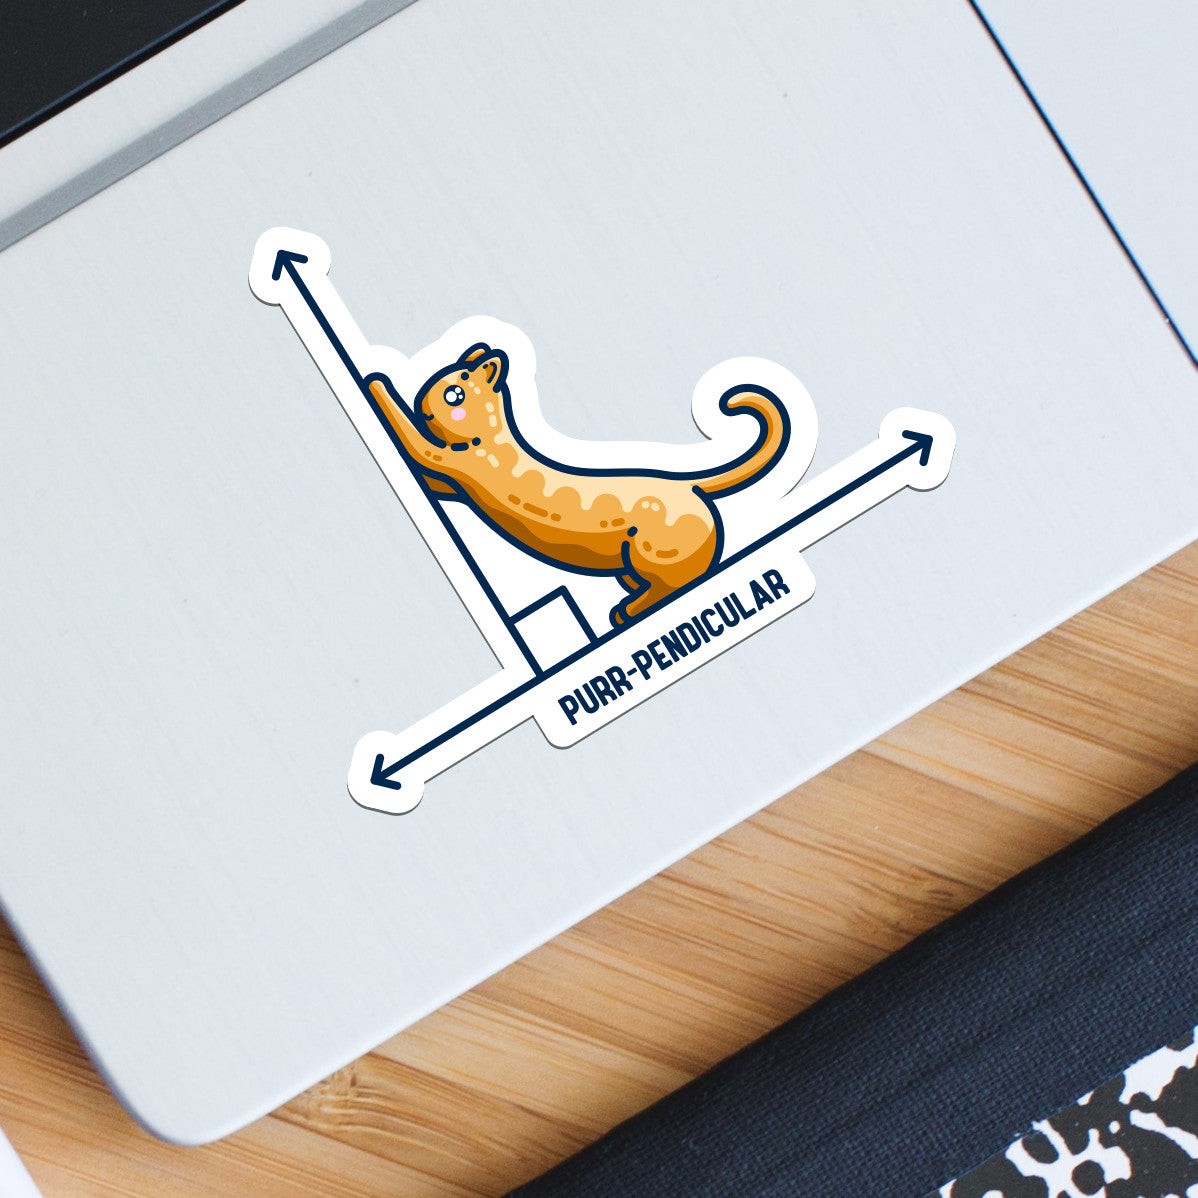 A white vinyl sticker featuring the design of a horizontal line intersected by a vertical line at a right angle. A cute ginger cat on the horizontal line is using the vertical line as a scratching post. The word purr-pendicular is written in capital letters beneath. The sticker is the shape of the design, forming a thick white border around it.